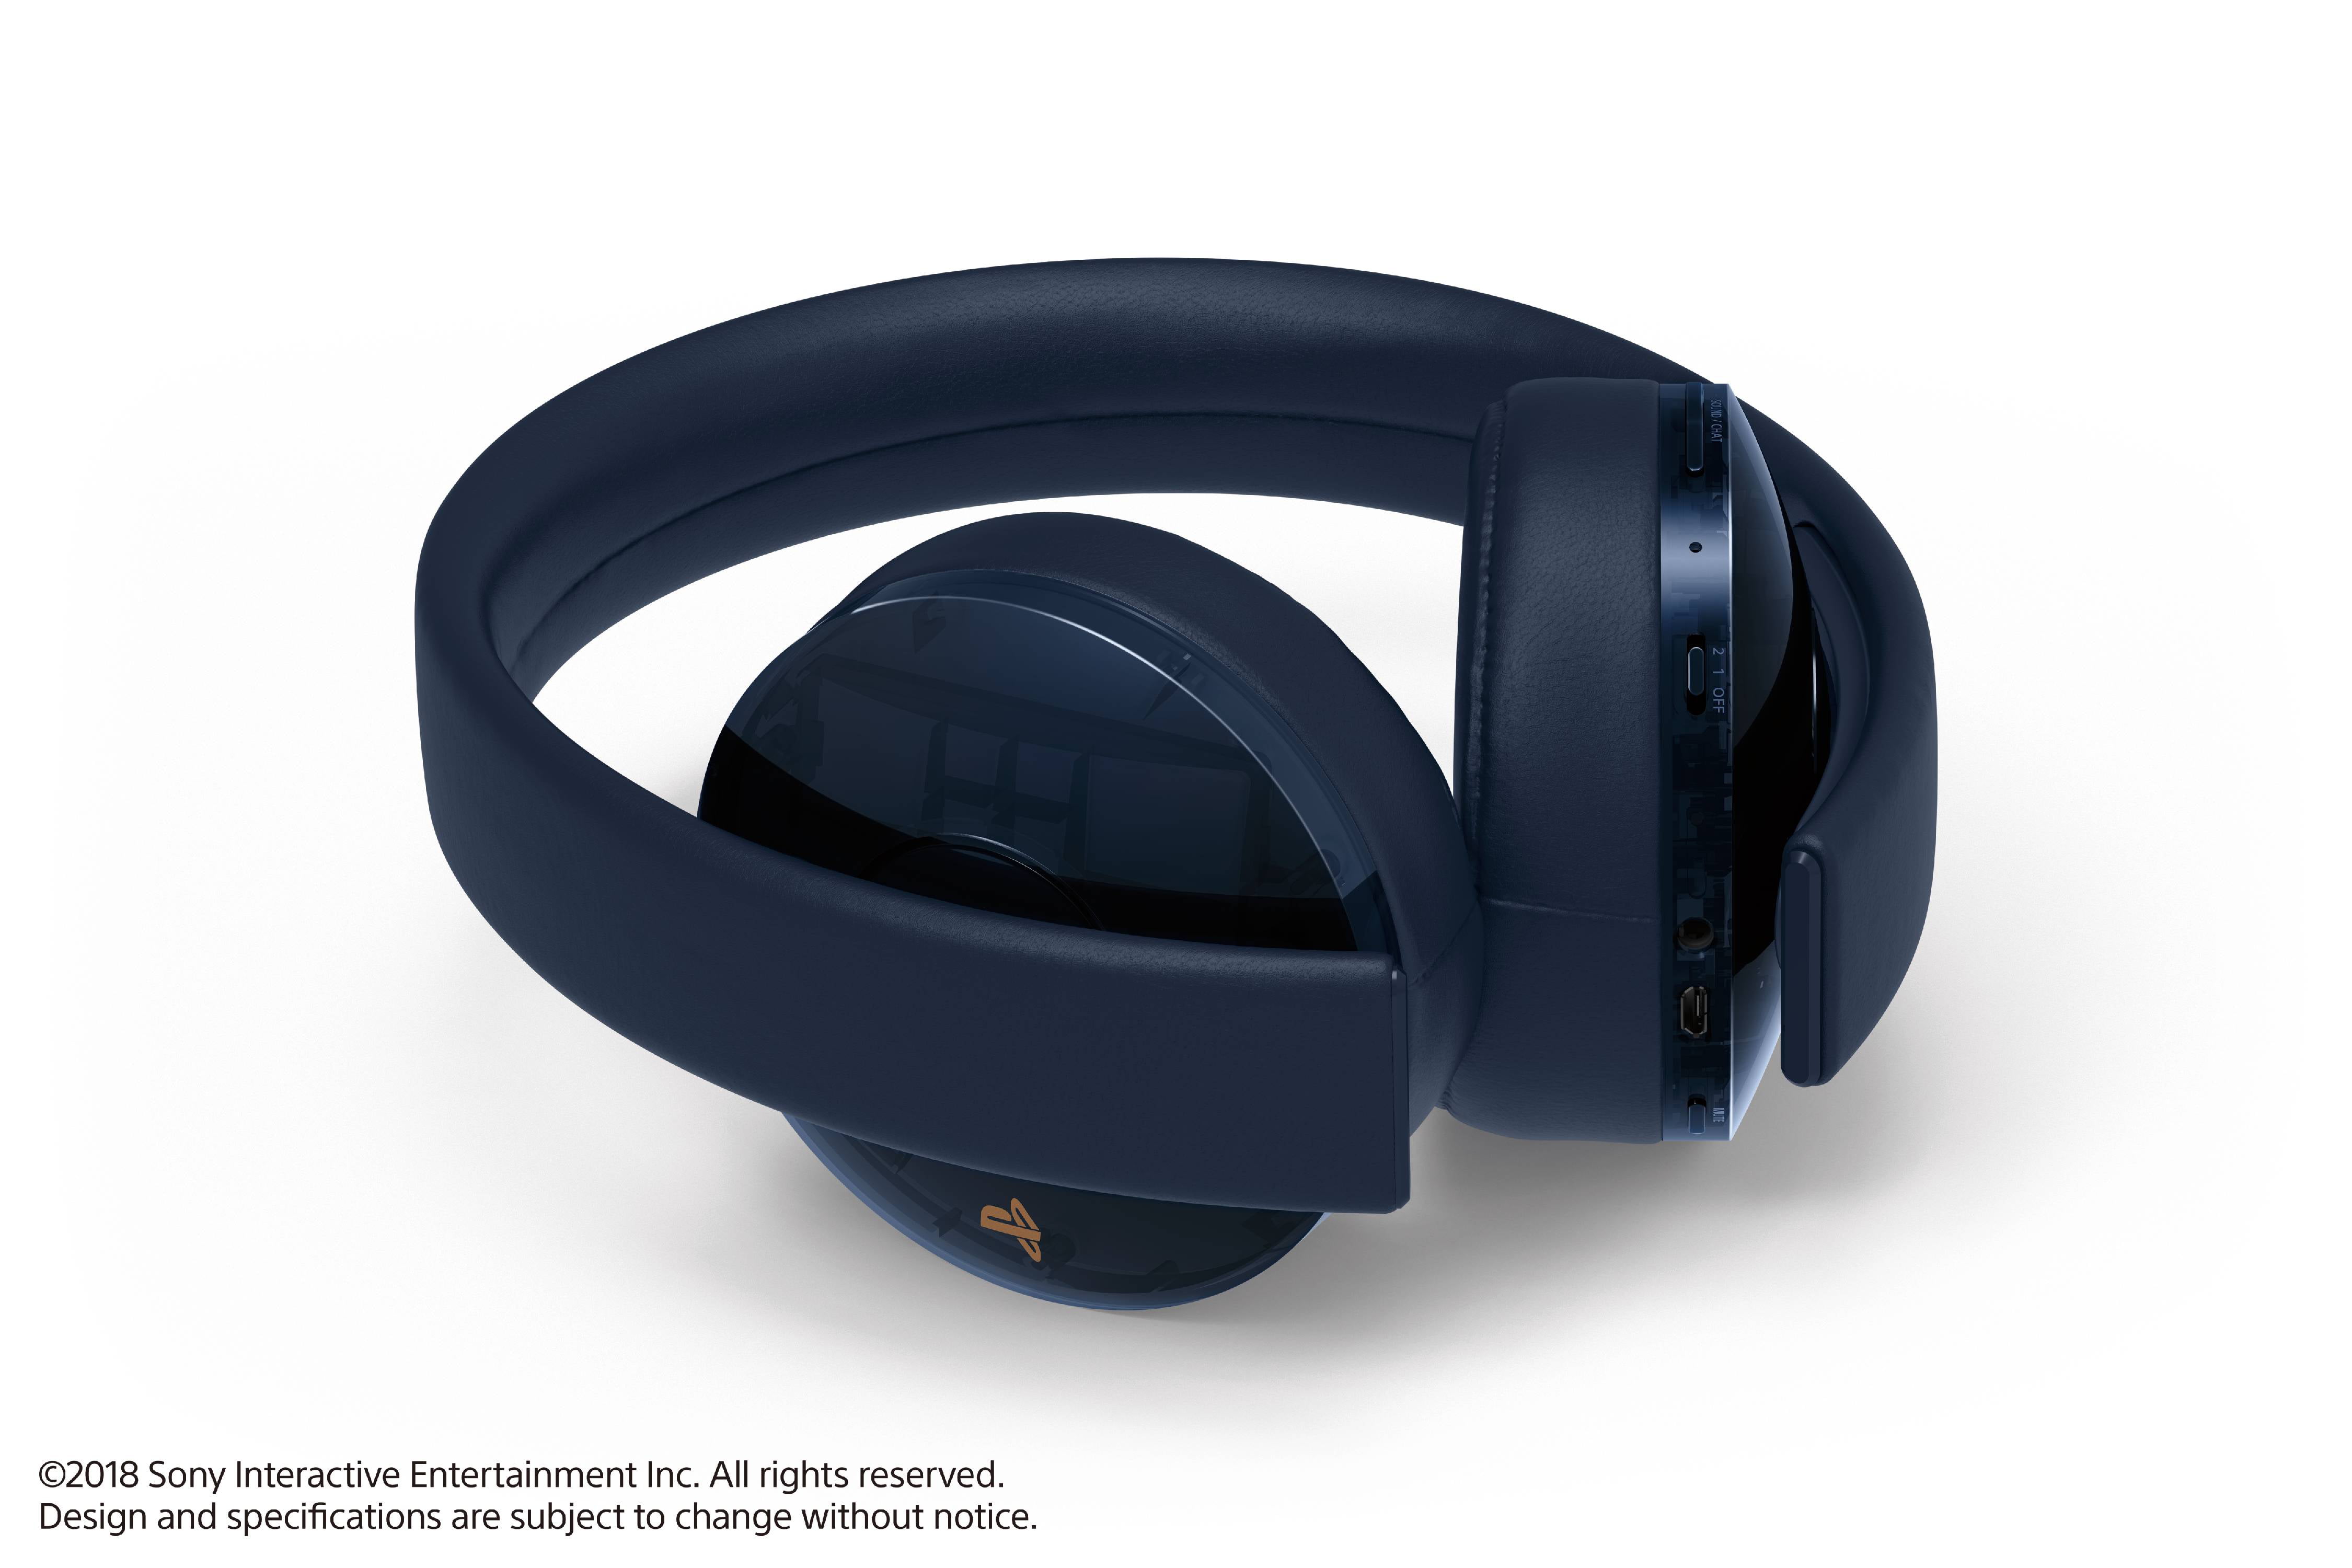 Sony 2.0 headset chat audio WH